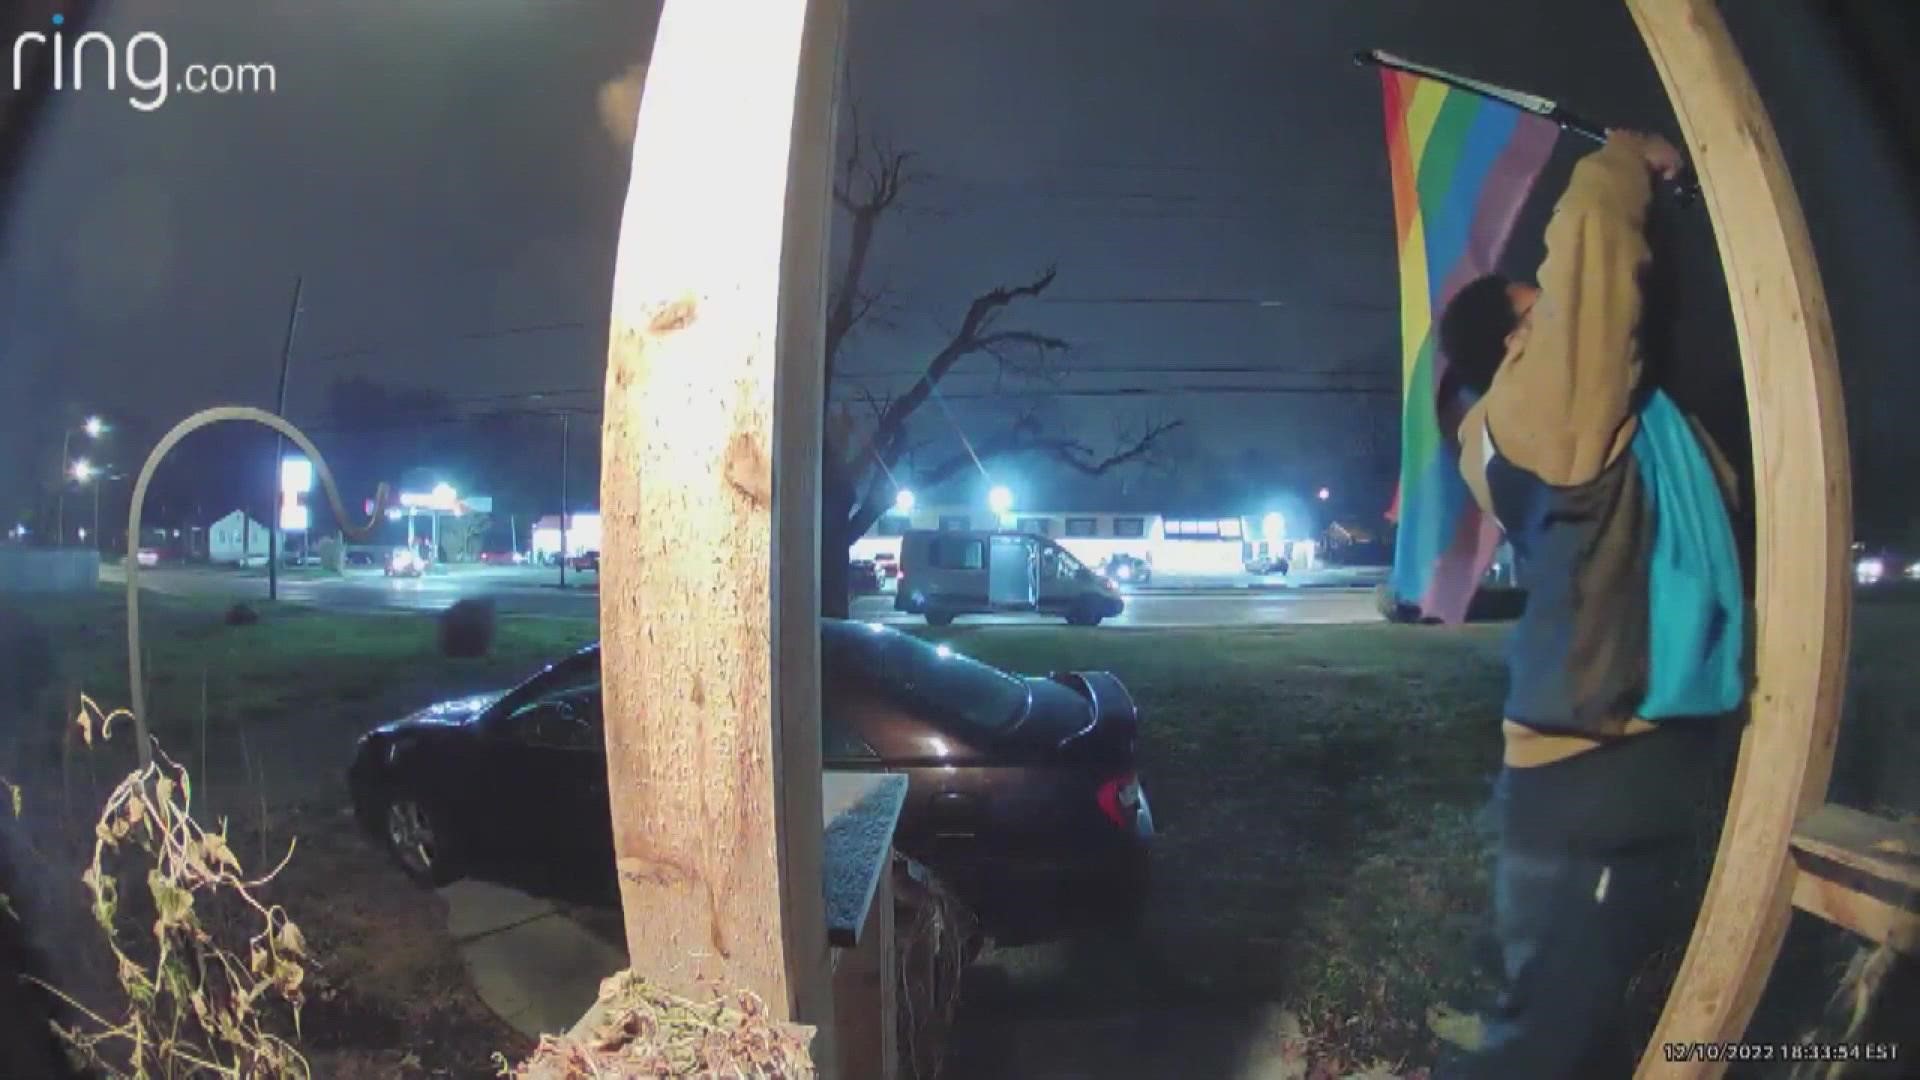 Neighbors say they suspect an Amazon driver stole several pride flags from homes.